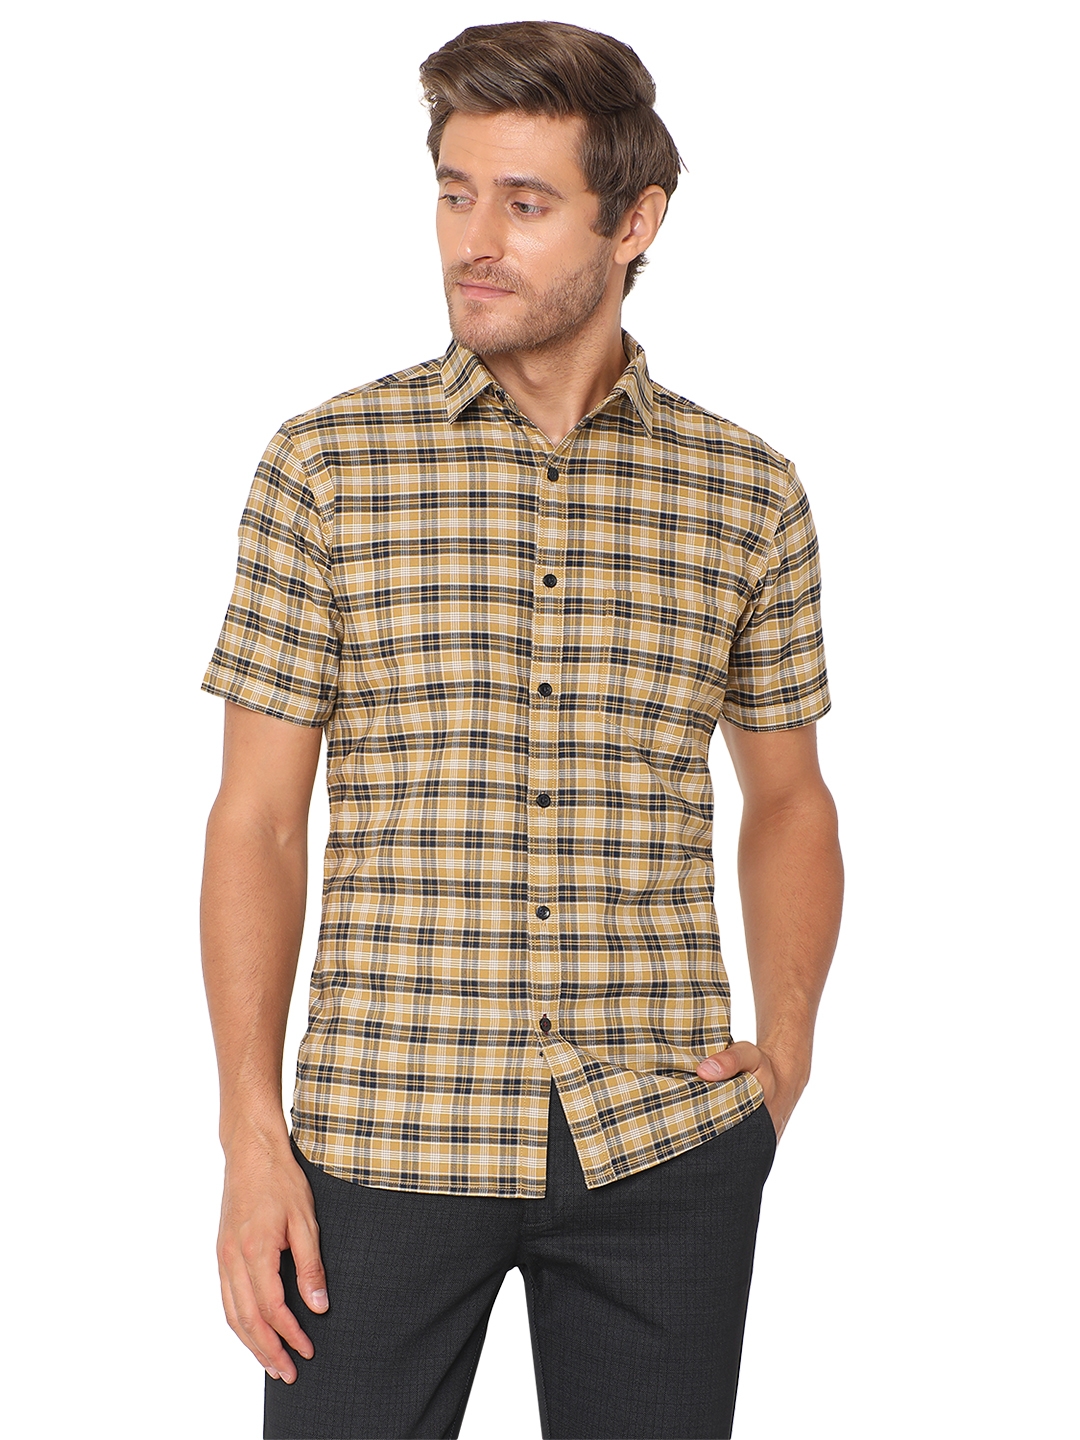 JadeBlue Sport | Harvest Gold Checked Casual Shirts (JBS-CH-881 HARVEST GOLD)